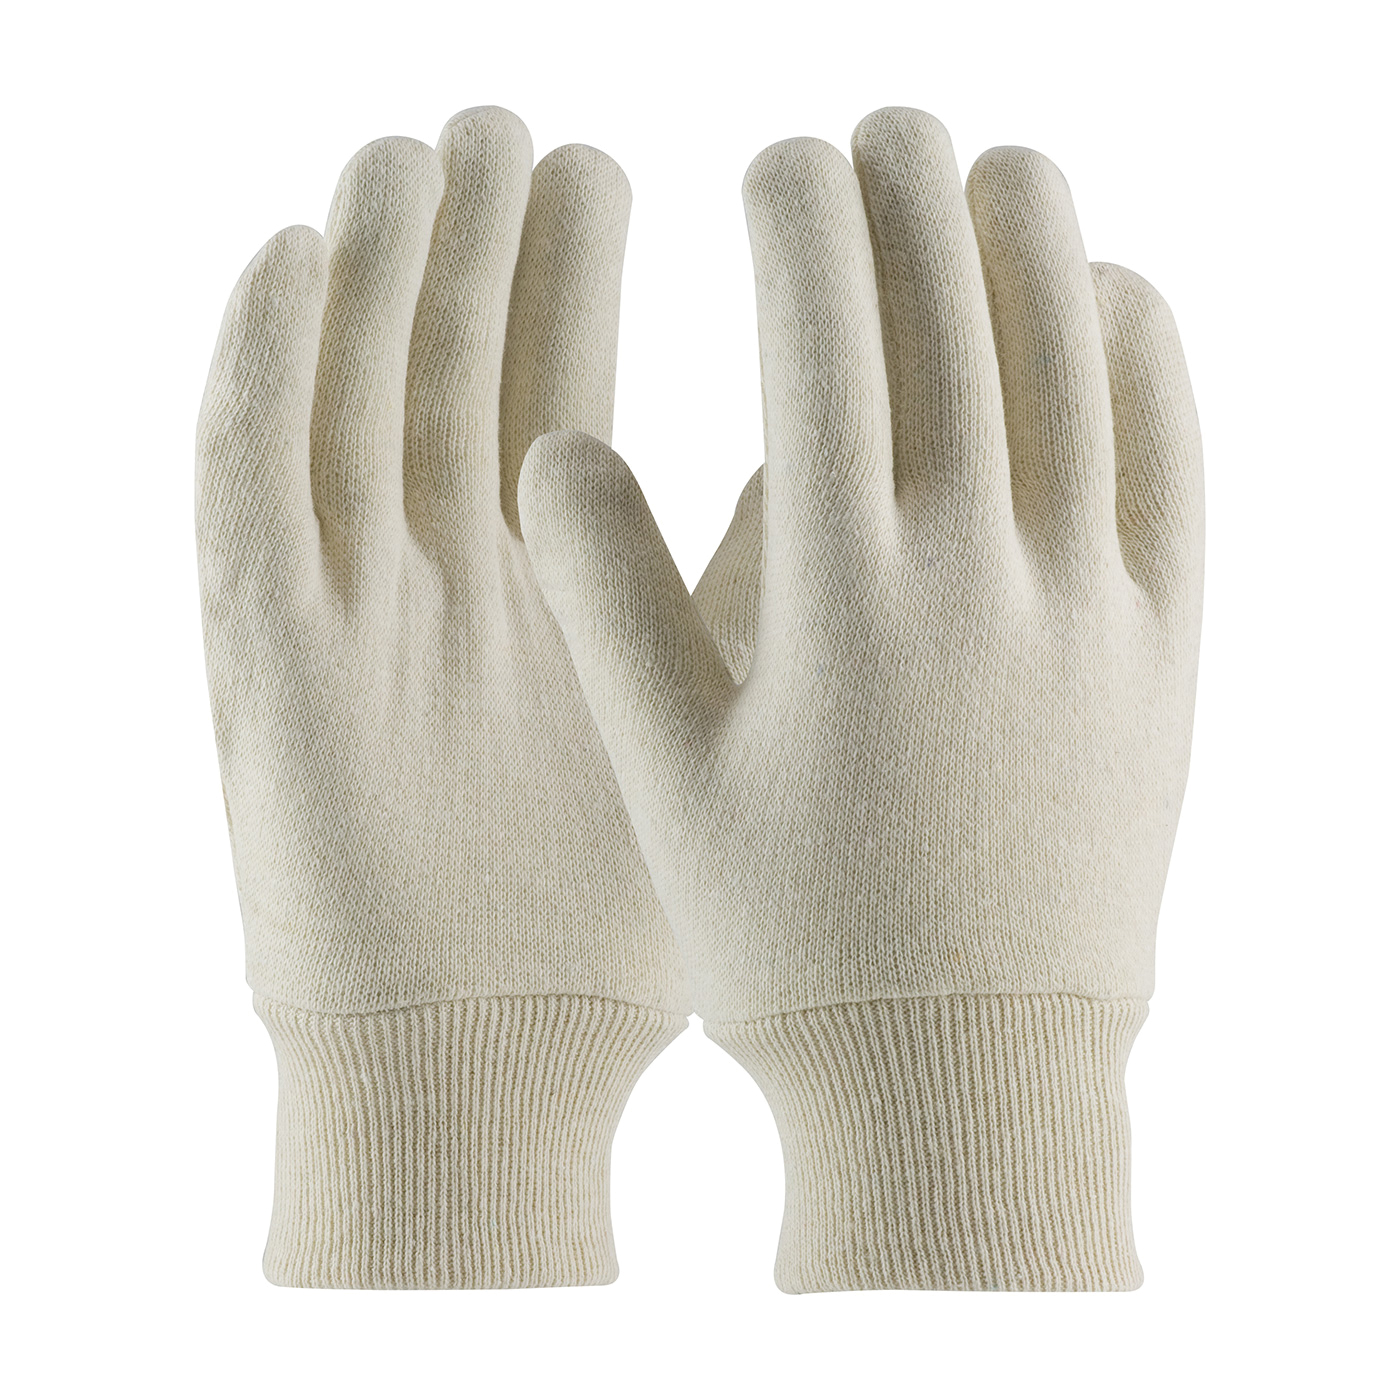 PIP® 95-606C Ladies Medium Weight General Purpose Gloves, Fabric/Work, Full Finger/Straight Thumb Style, Cotton/Polyester Palm, Cotton/Jersey/Polyester, Natural, Knit Wrist Cuff, Uncoated Coating, Cotton/Polyester Lining